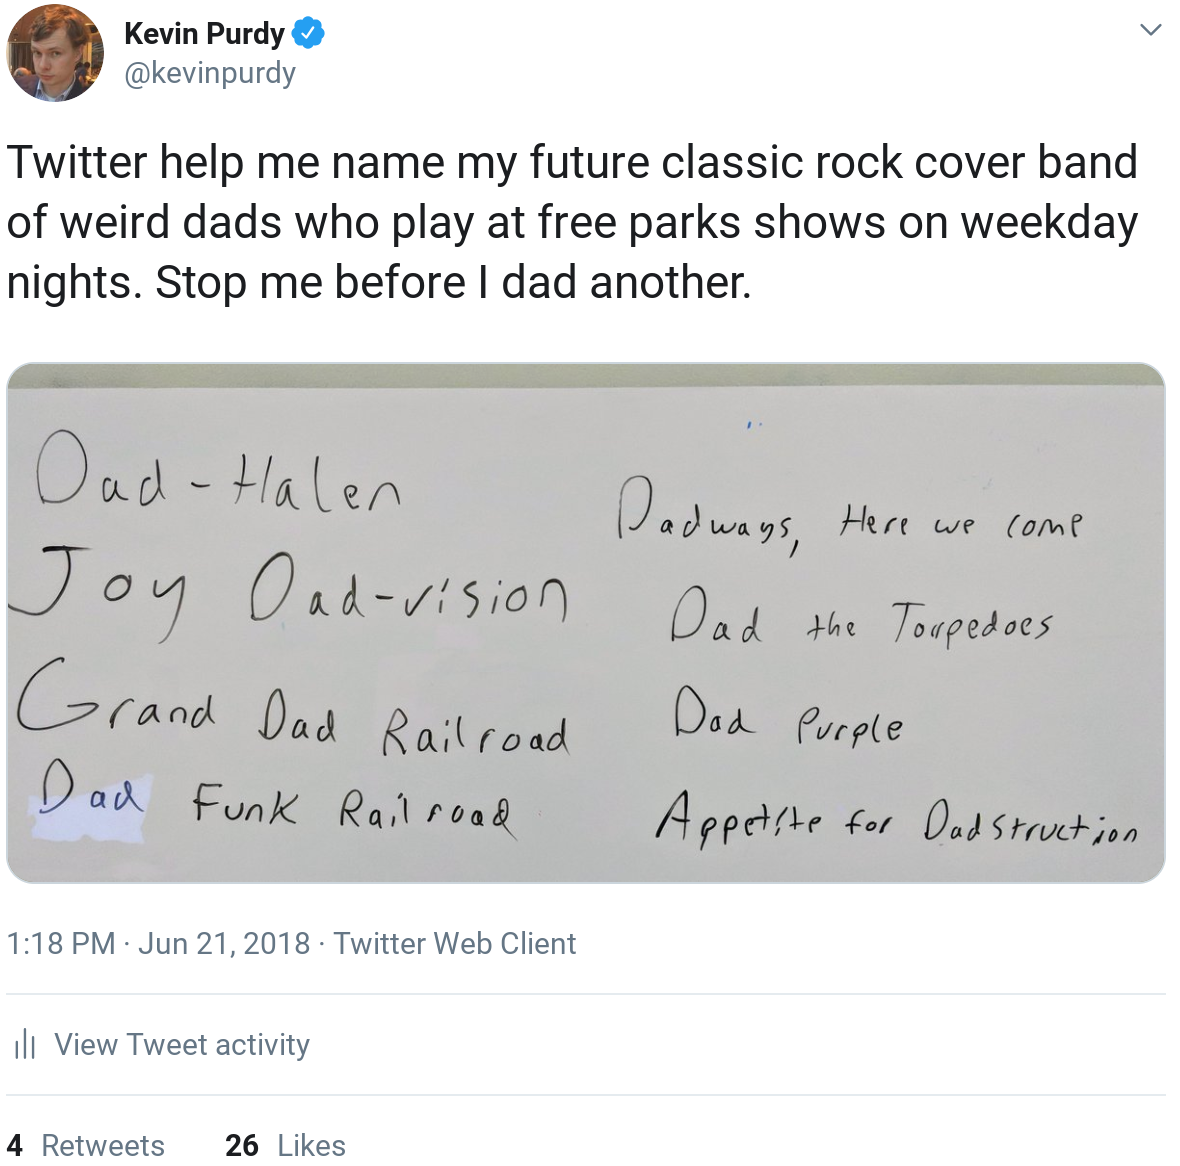 Twitter help me name my future classic rock cover band of weird dads who play at free parks shows on weekday nights. Stop me before I dad another.